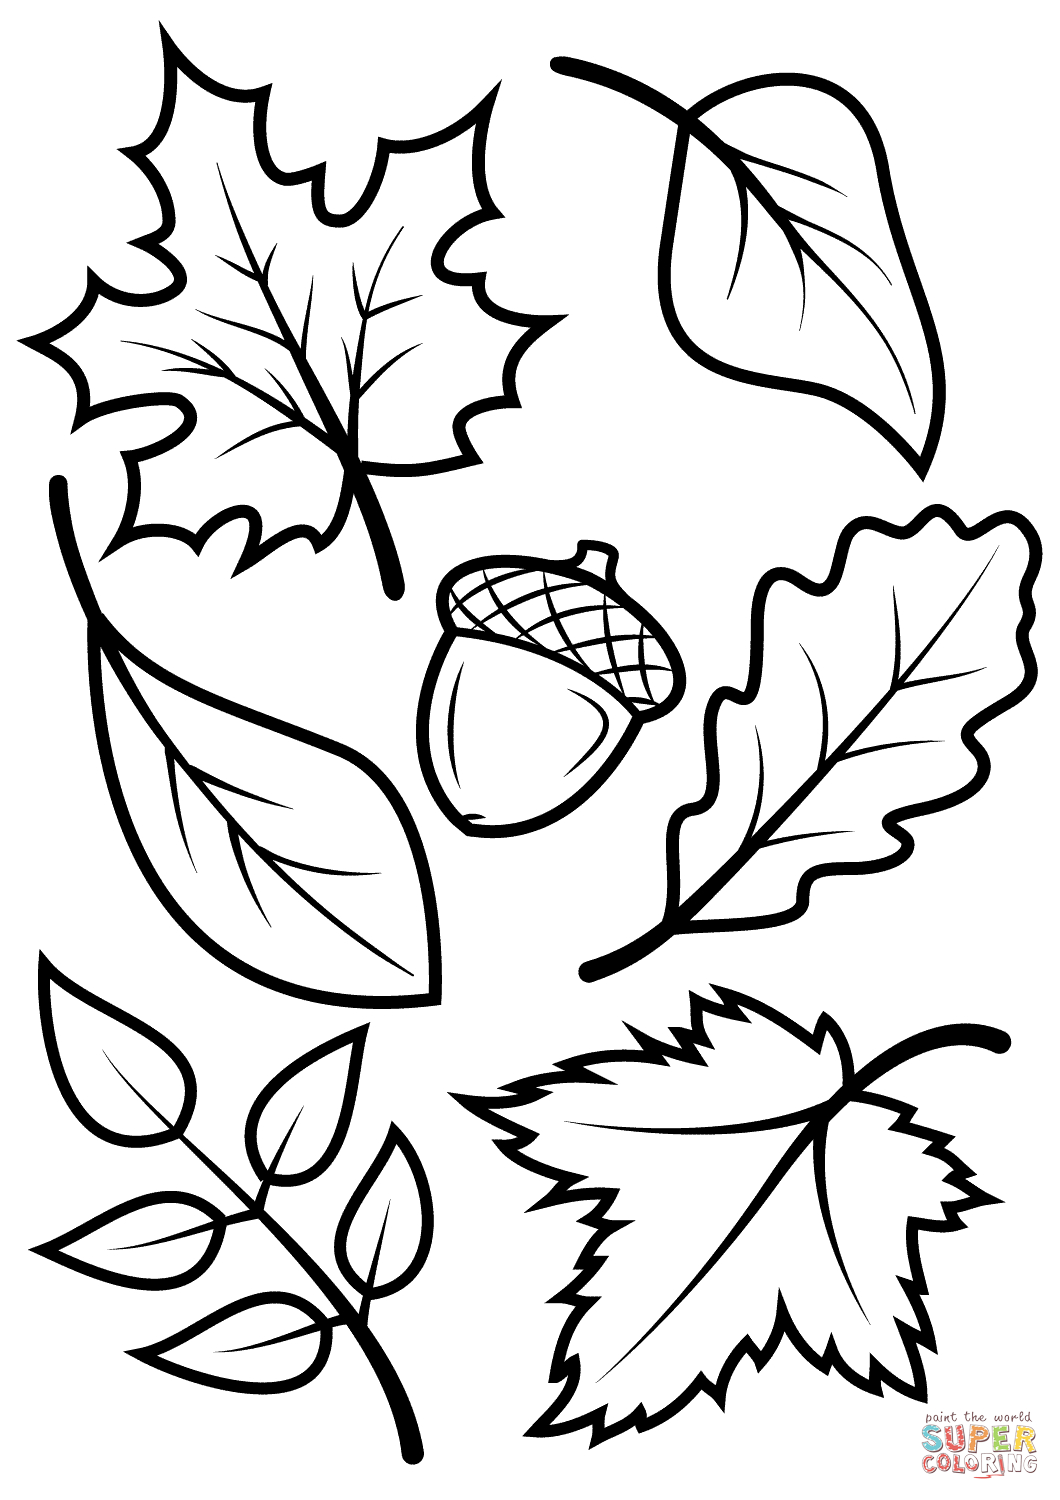 Fall Leaves And Acorn Coloring Page | Free Printable Coloring Pages - Free Printable Leaves